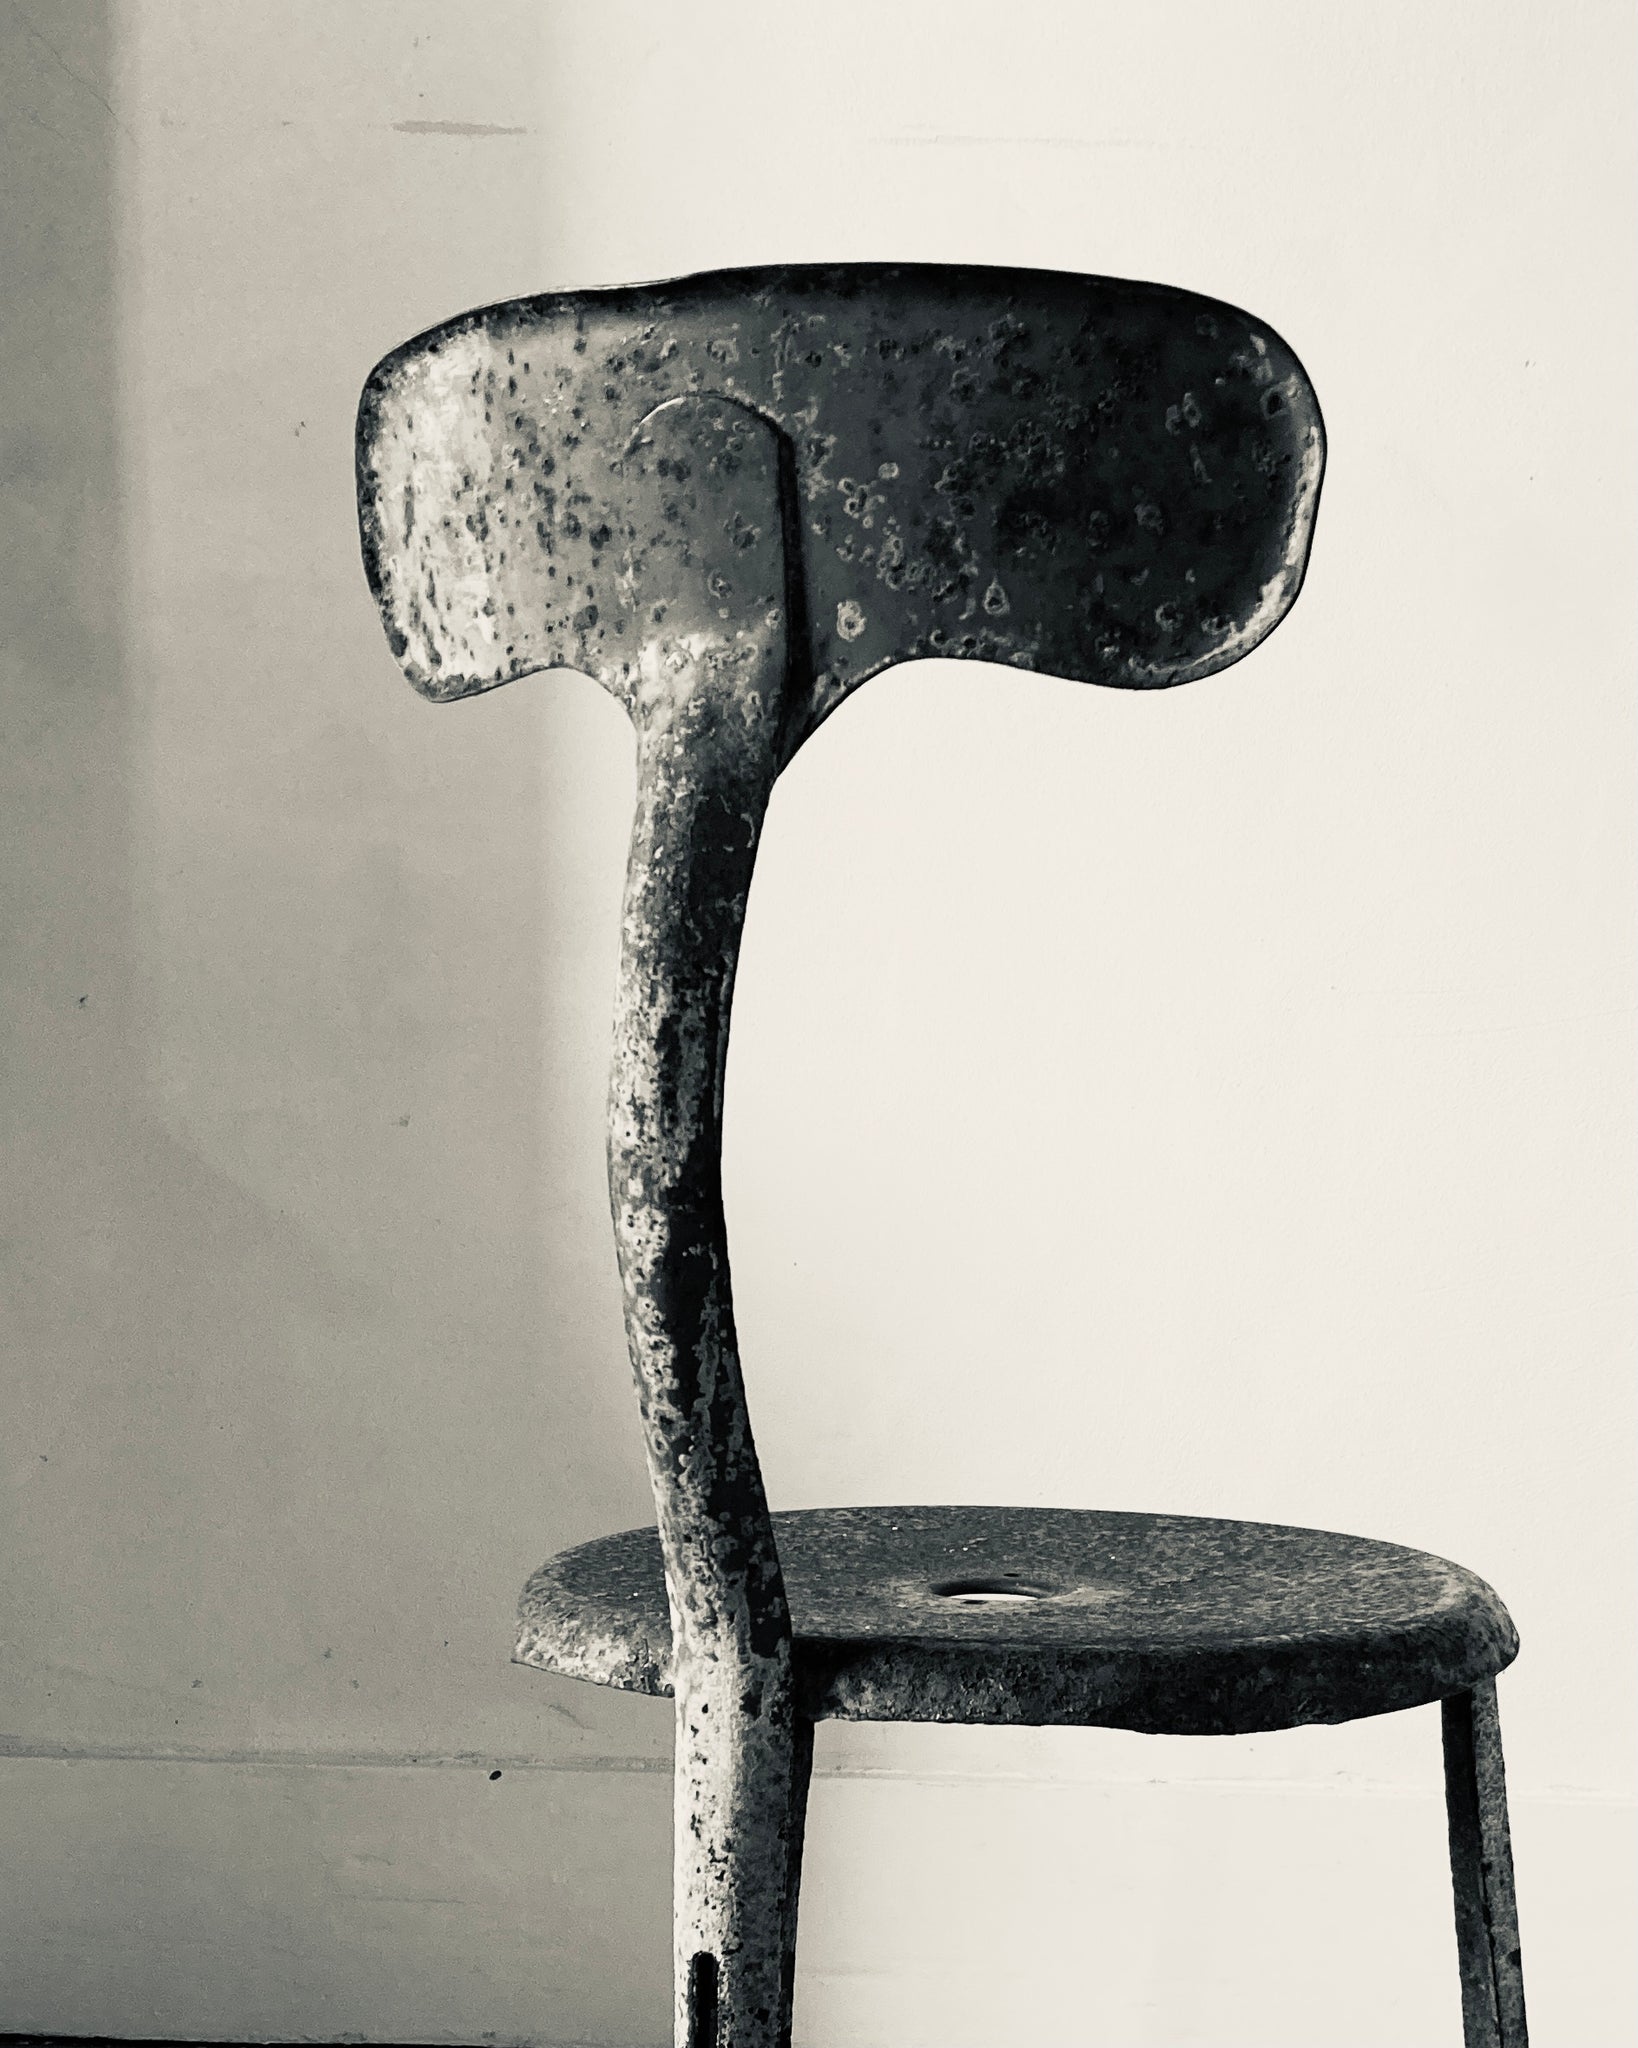 Sculptural Metal Chair and Table